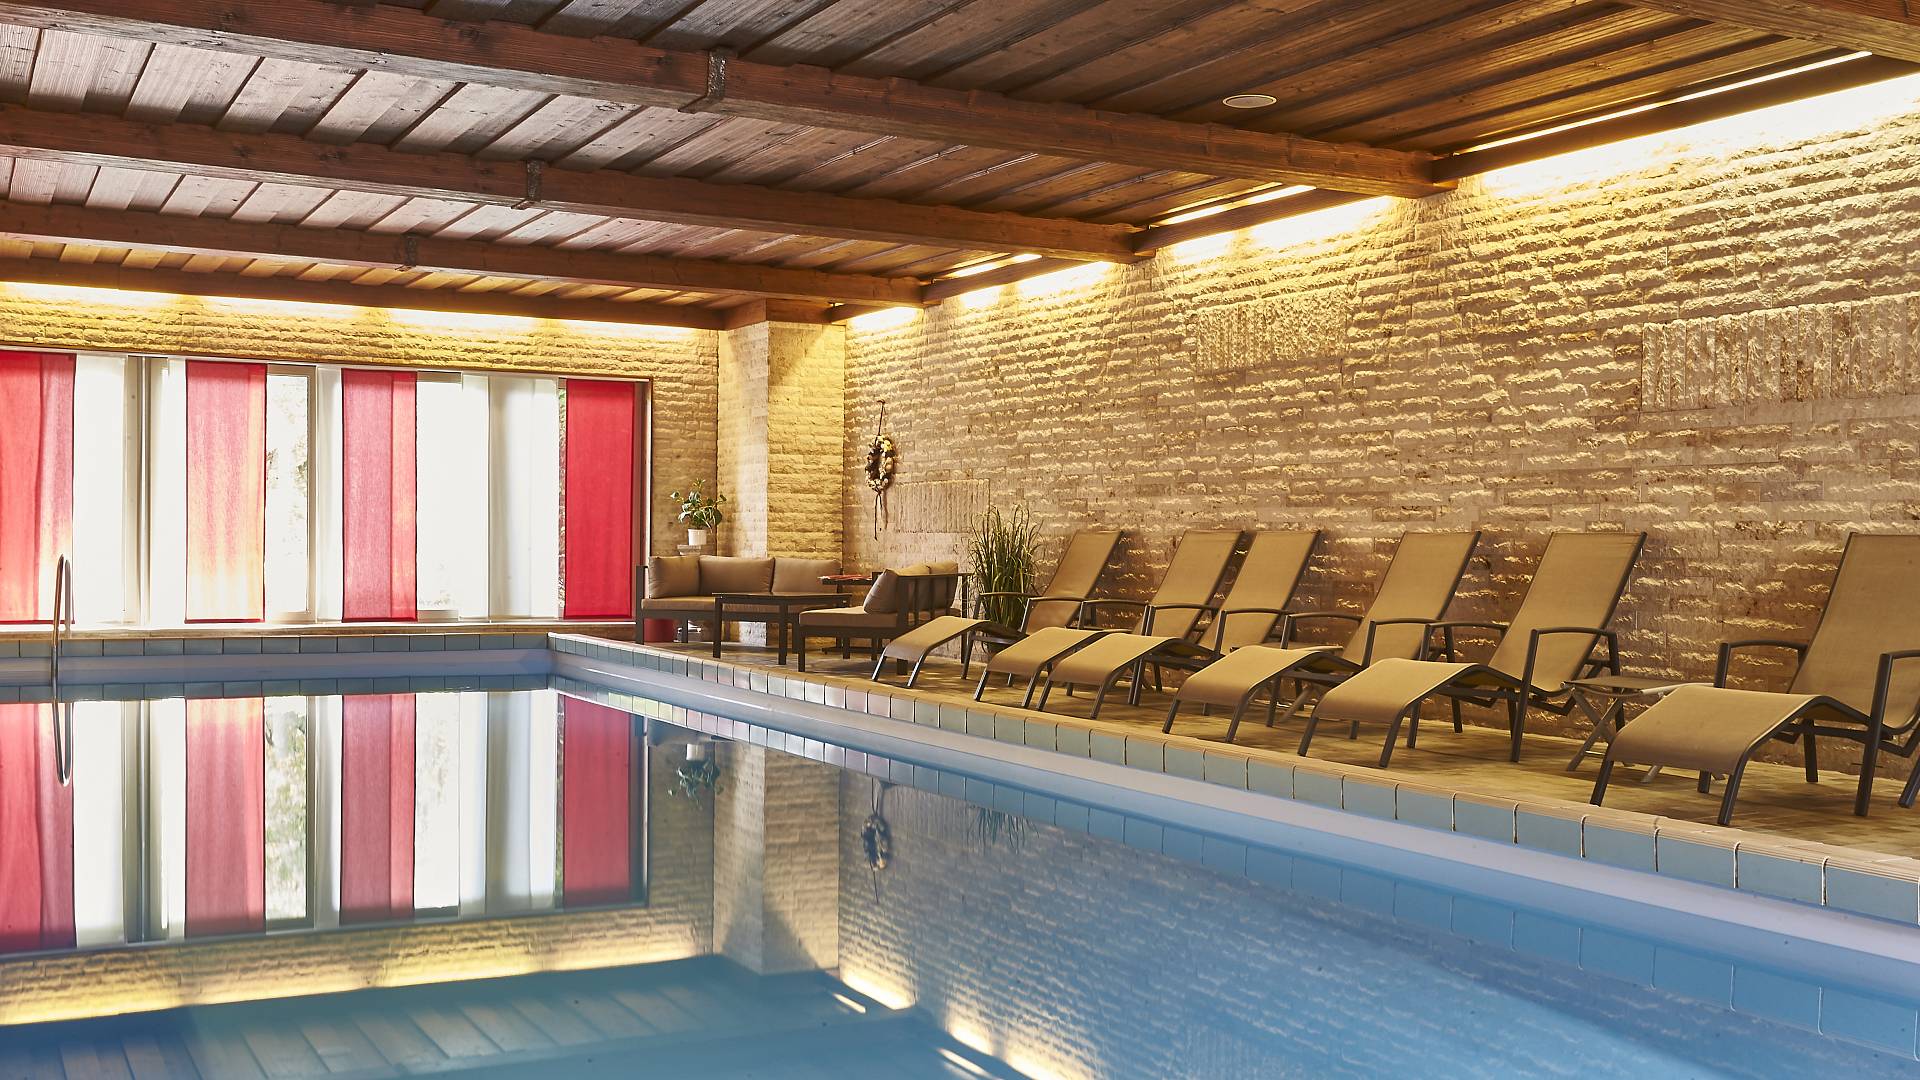 Indoor swimming pool with sunbeds at the poolside